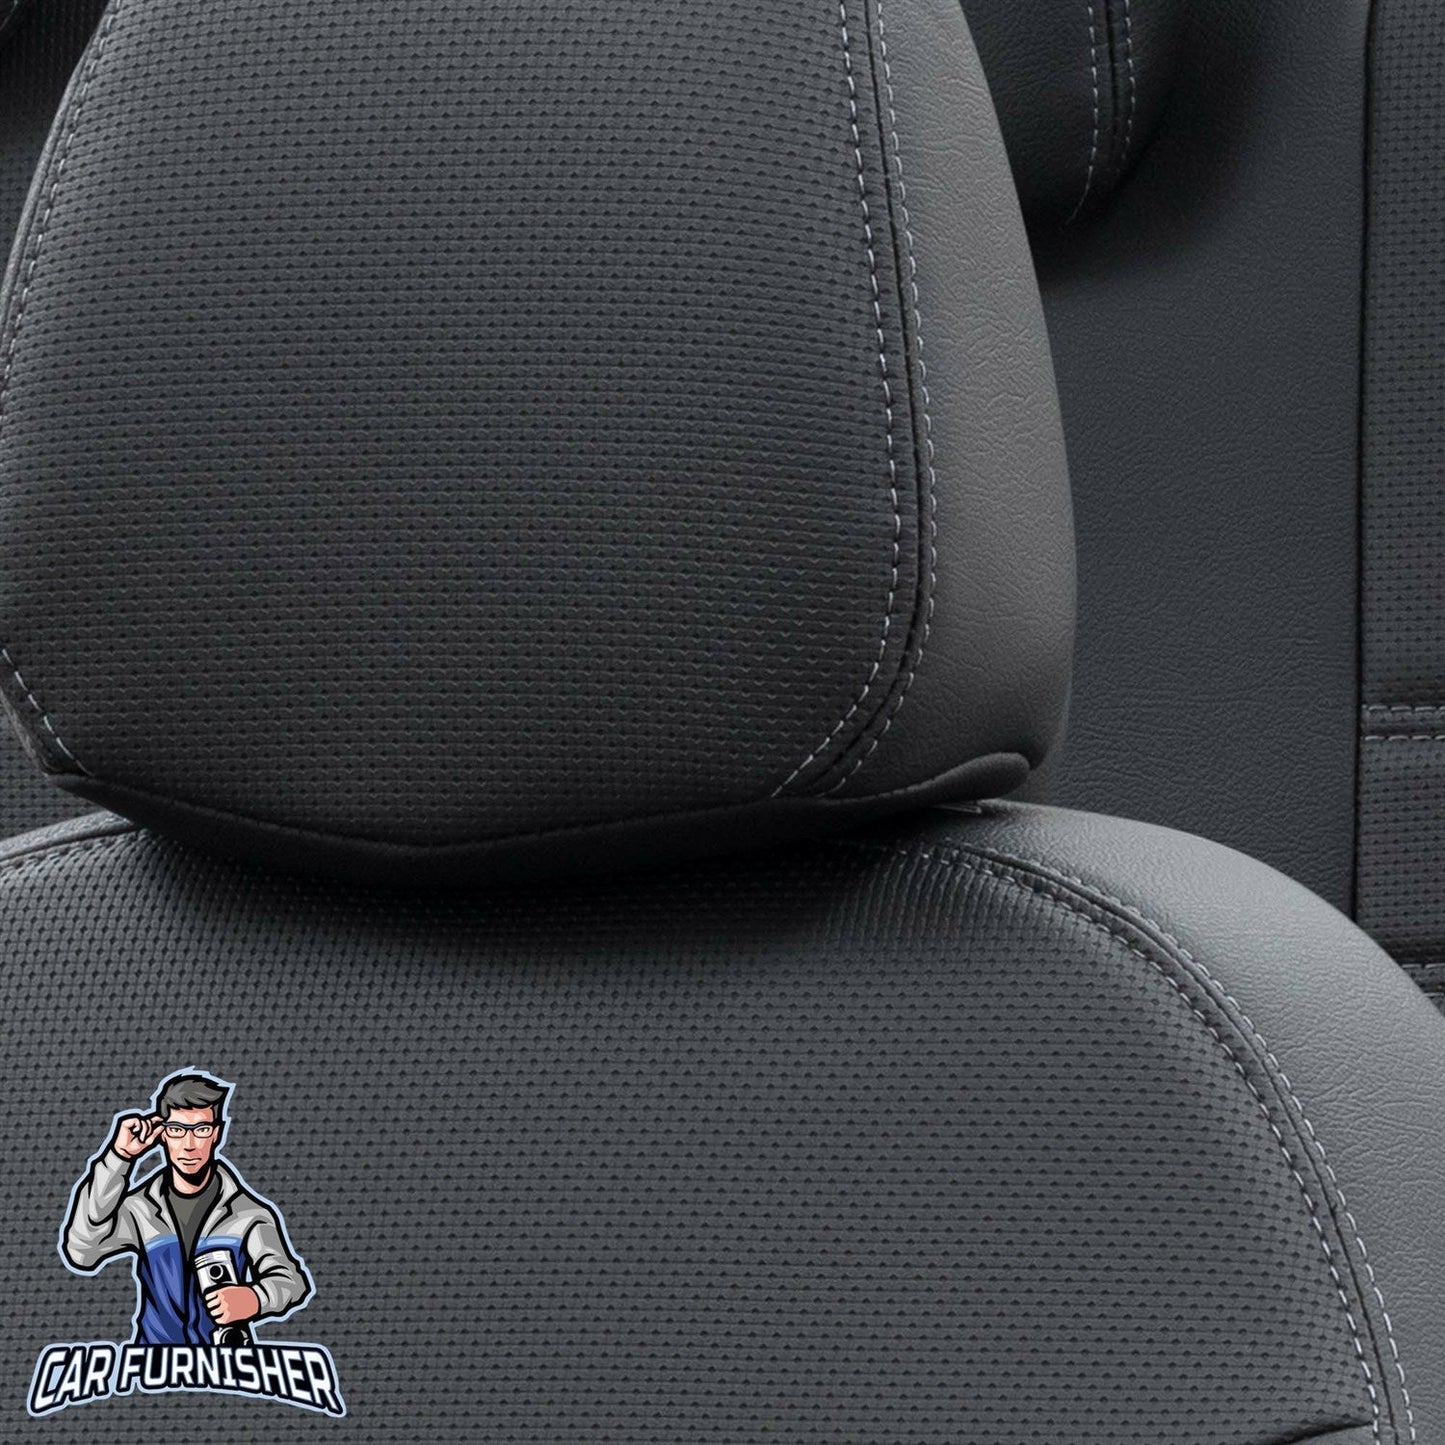 Peugeot 301 Seat Covers New York Leather Design Black Leather